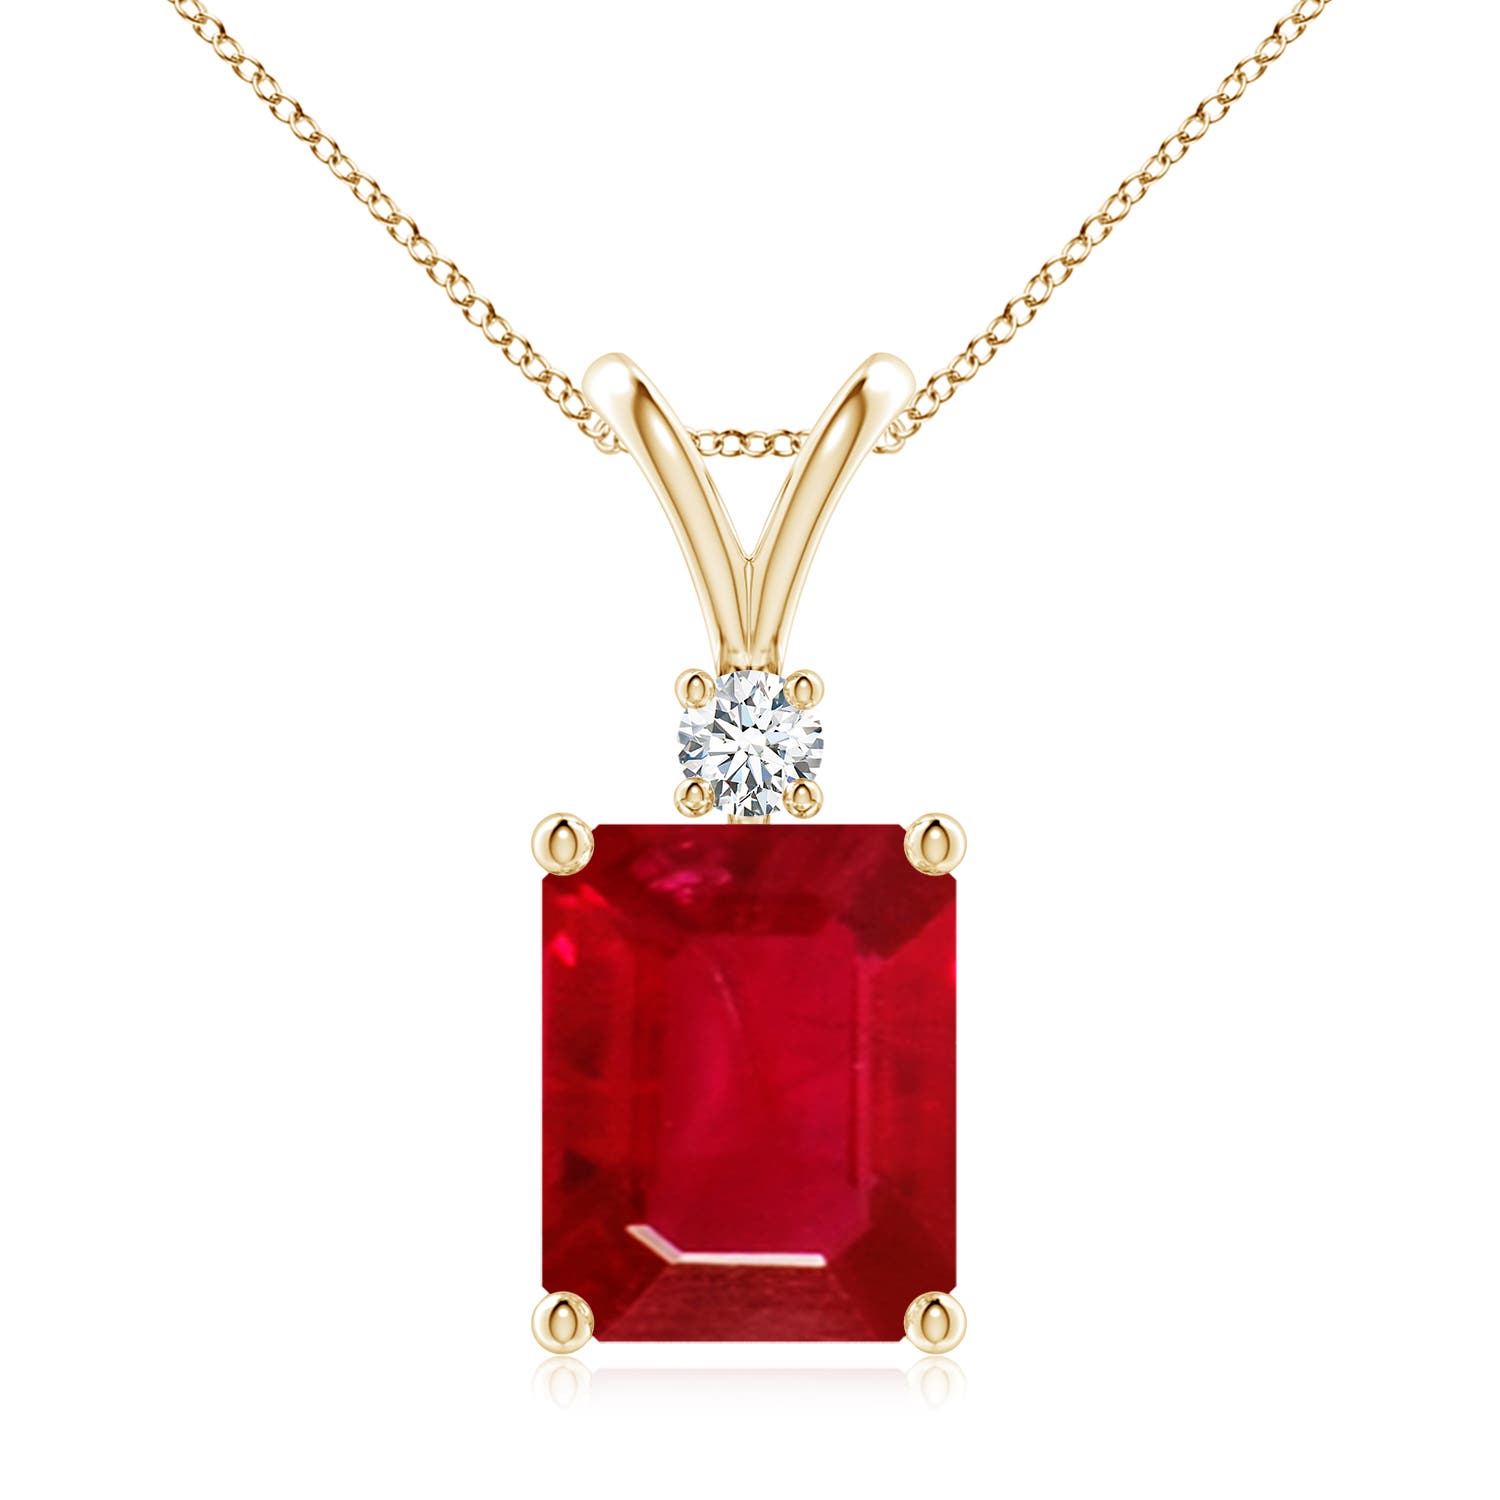 AAA - Ruby / 4.11 CT / 14 KT Yellow Gold